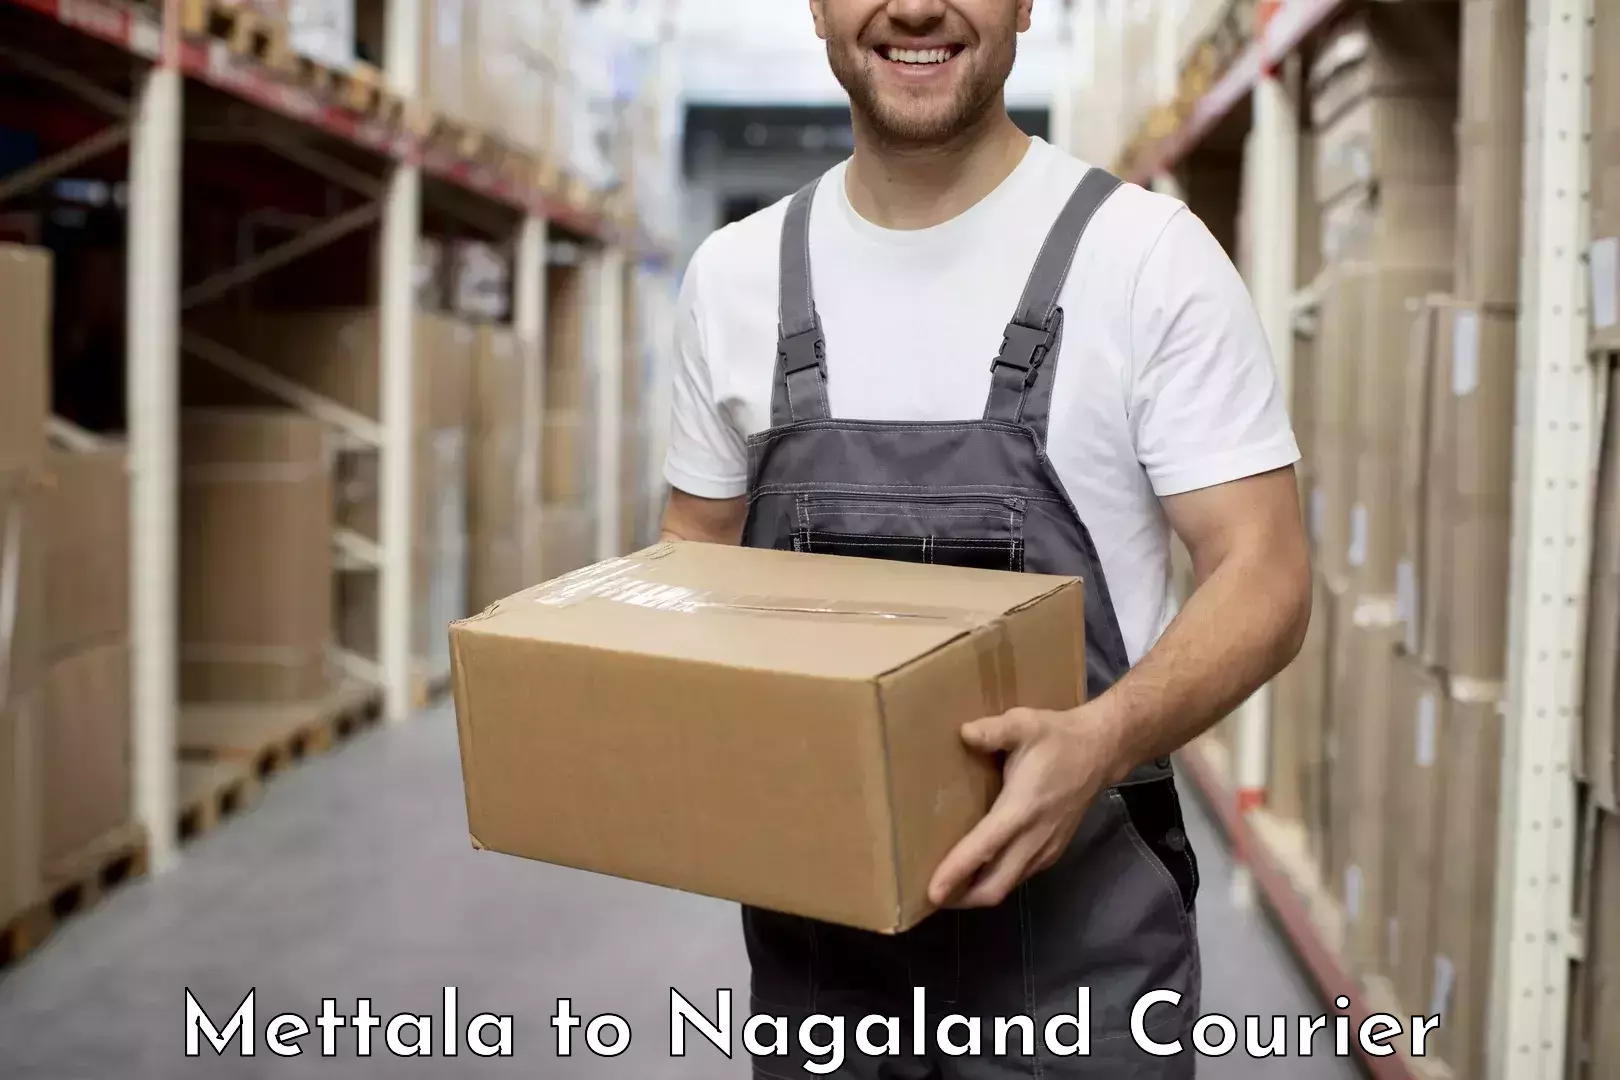 Tech-enabled shipping Mettala to Nagaland